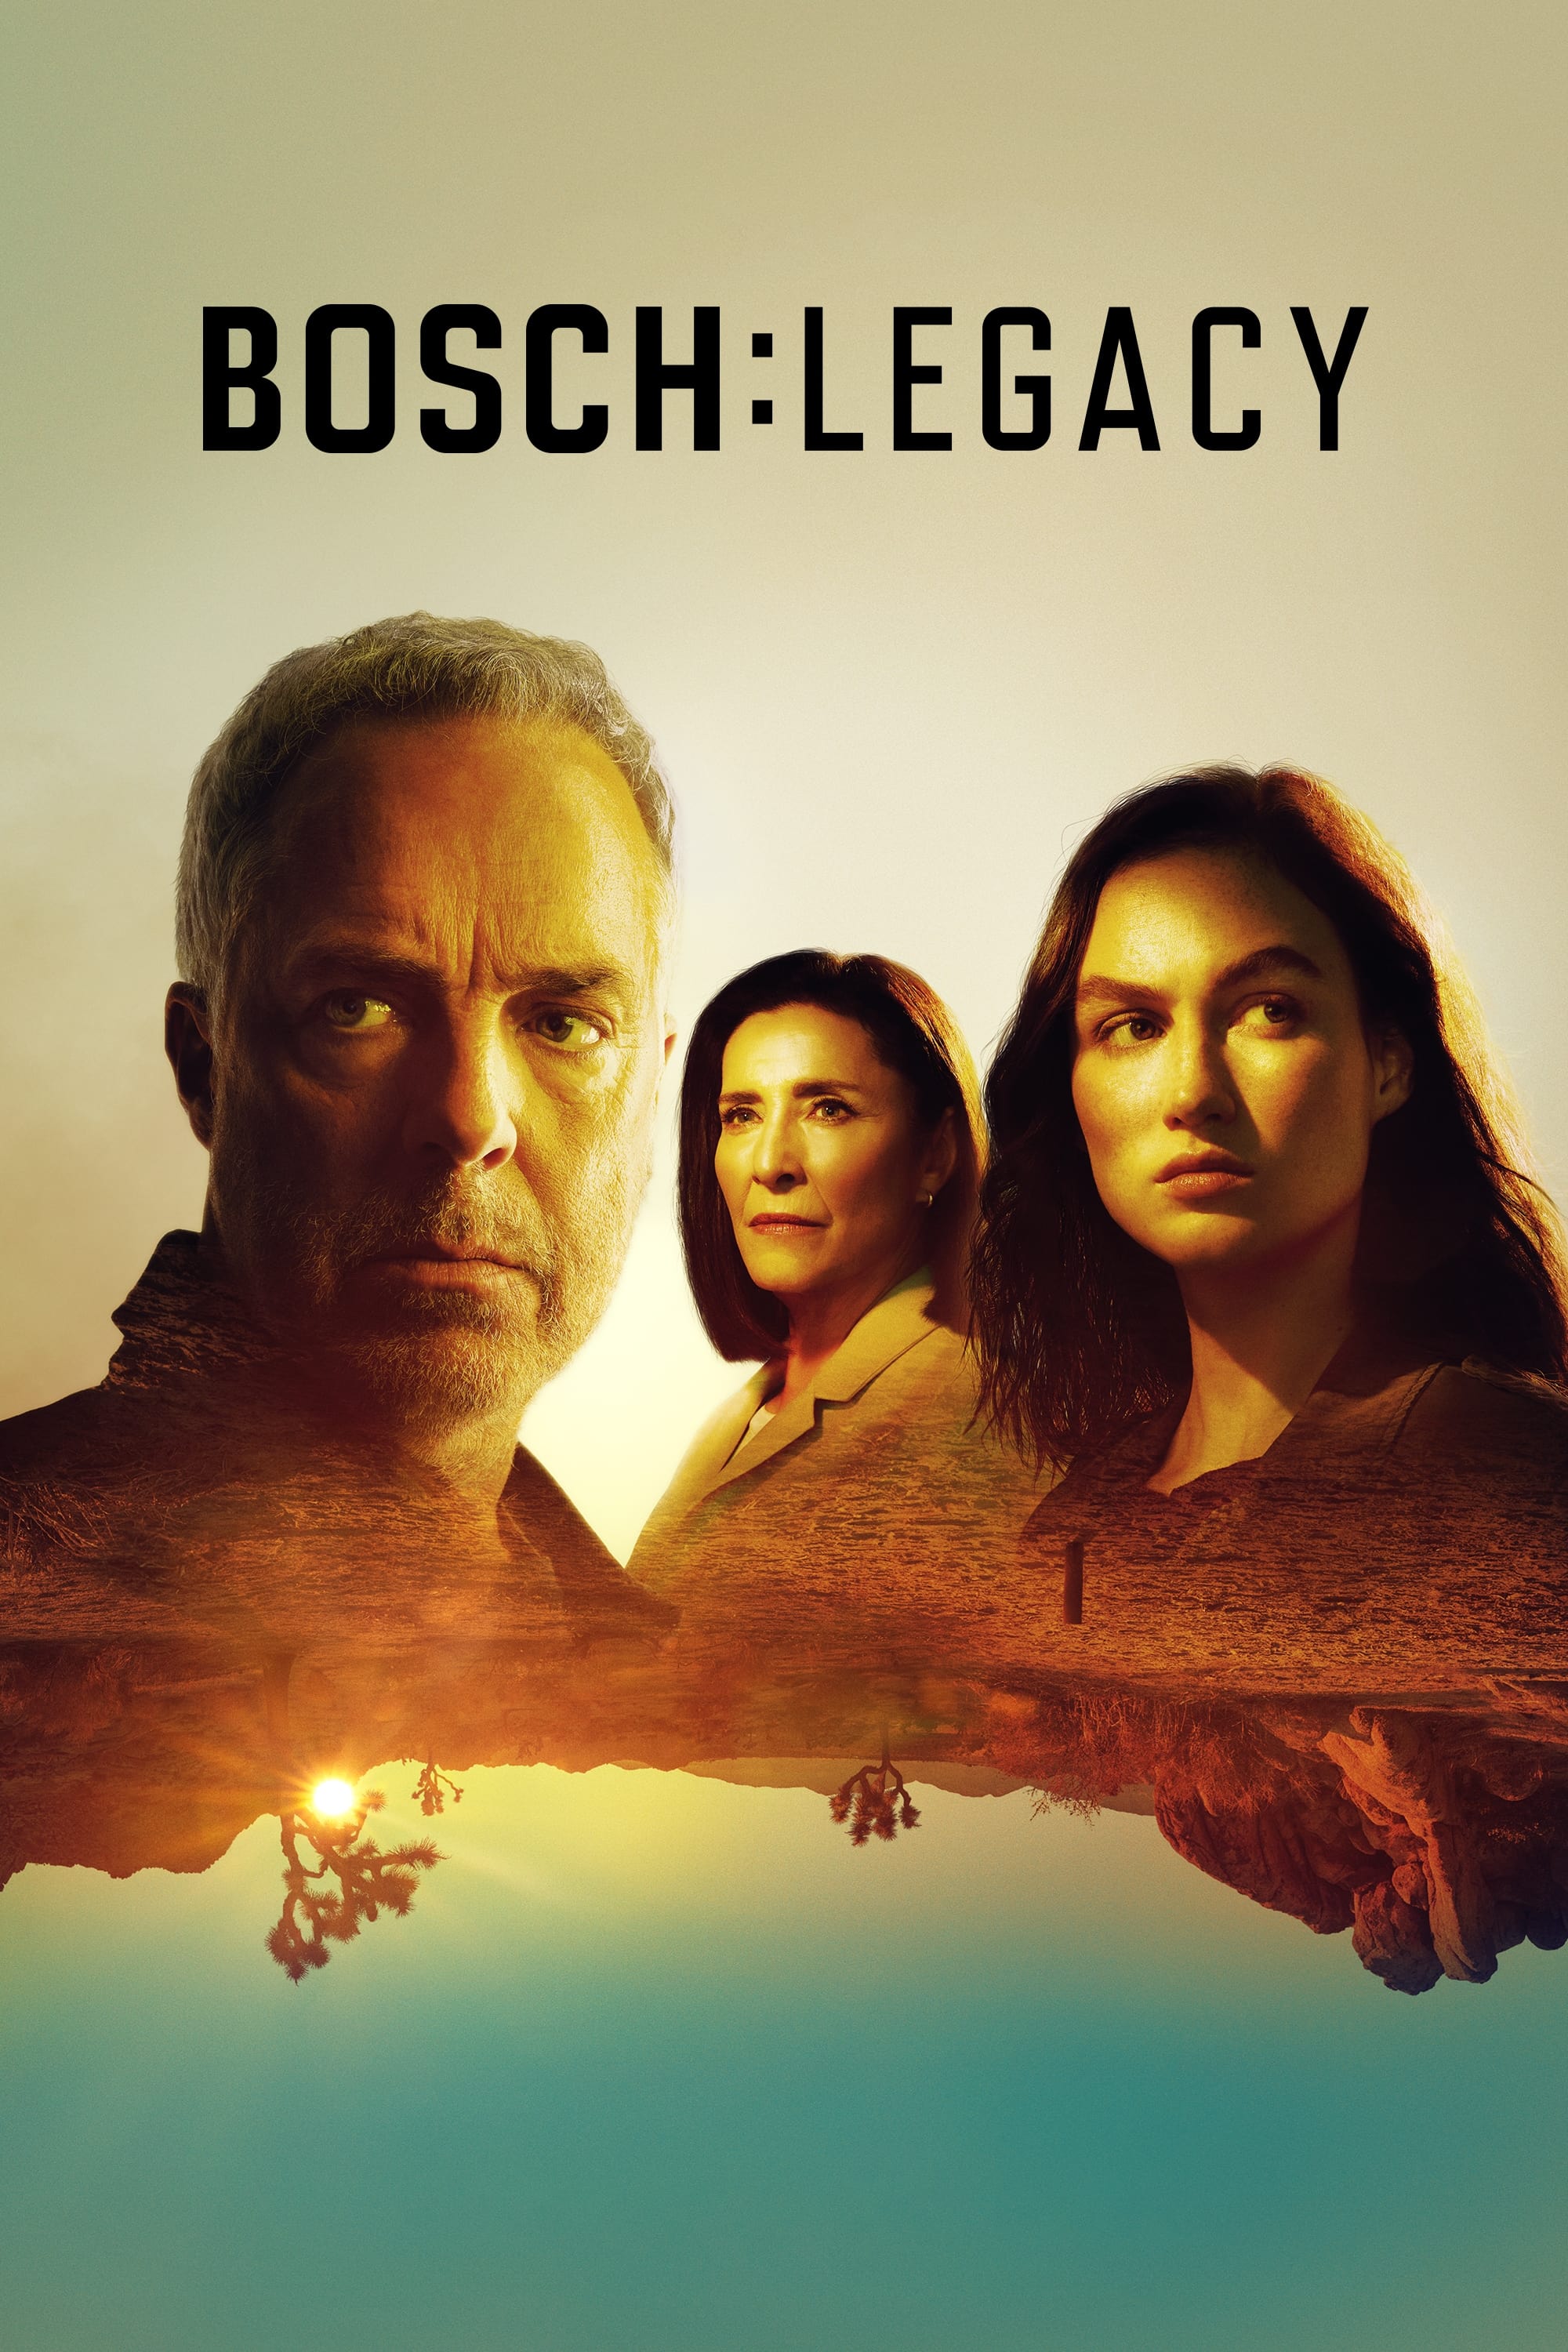 Bosch: Legacy TV Shows About Private Investigator